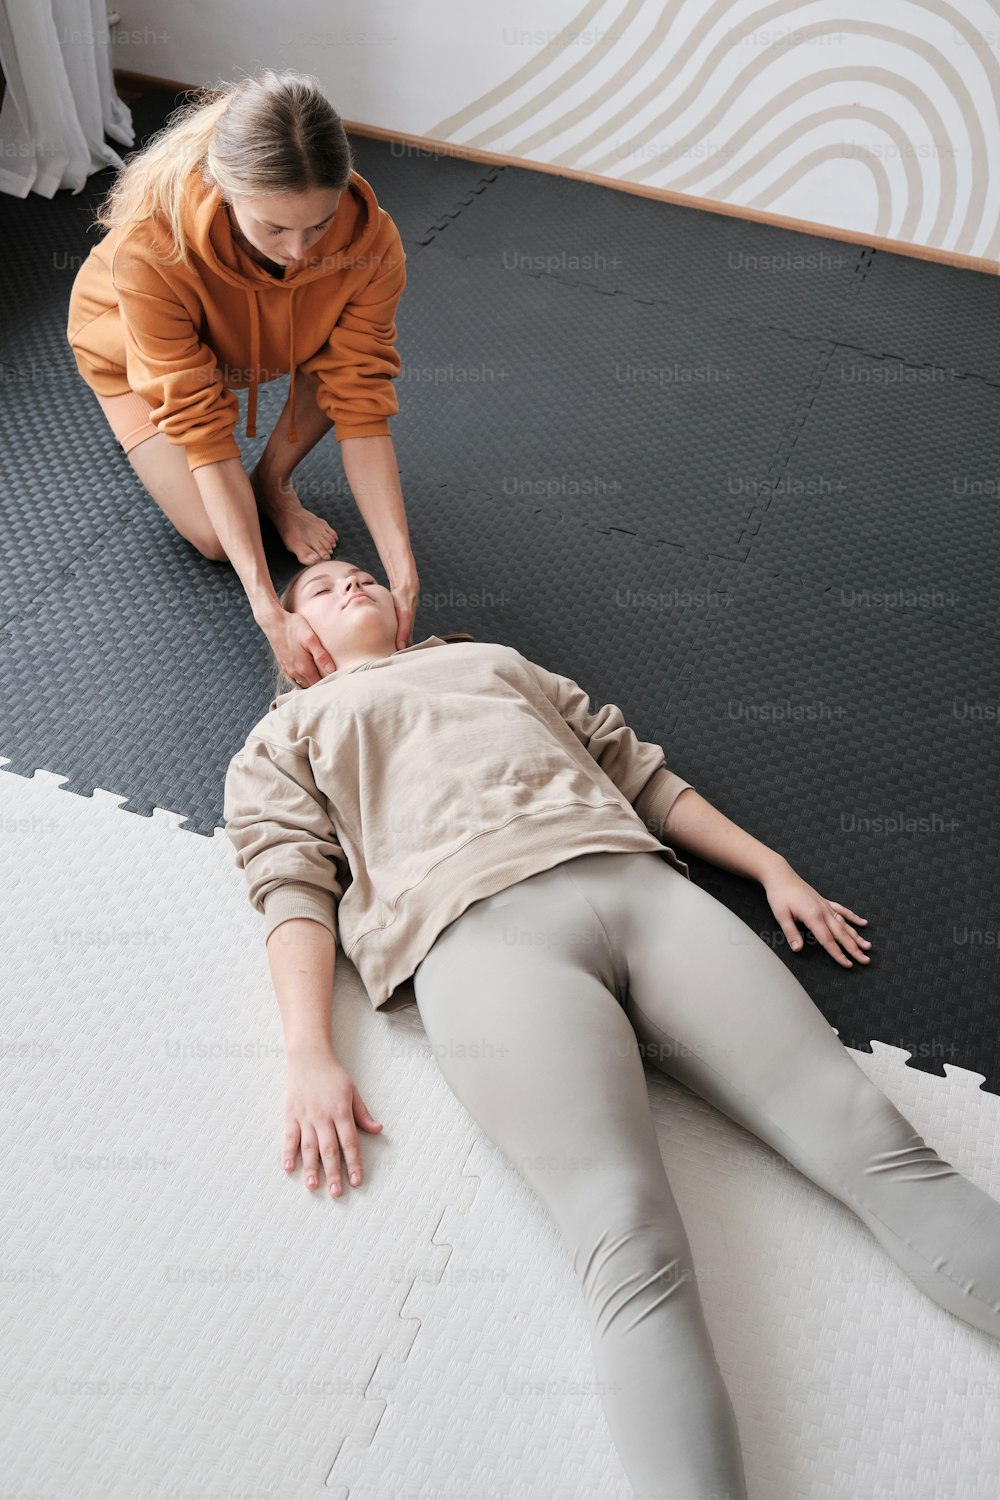 a woman is laying on the floor with a man